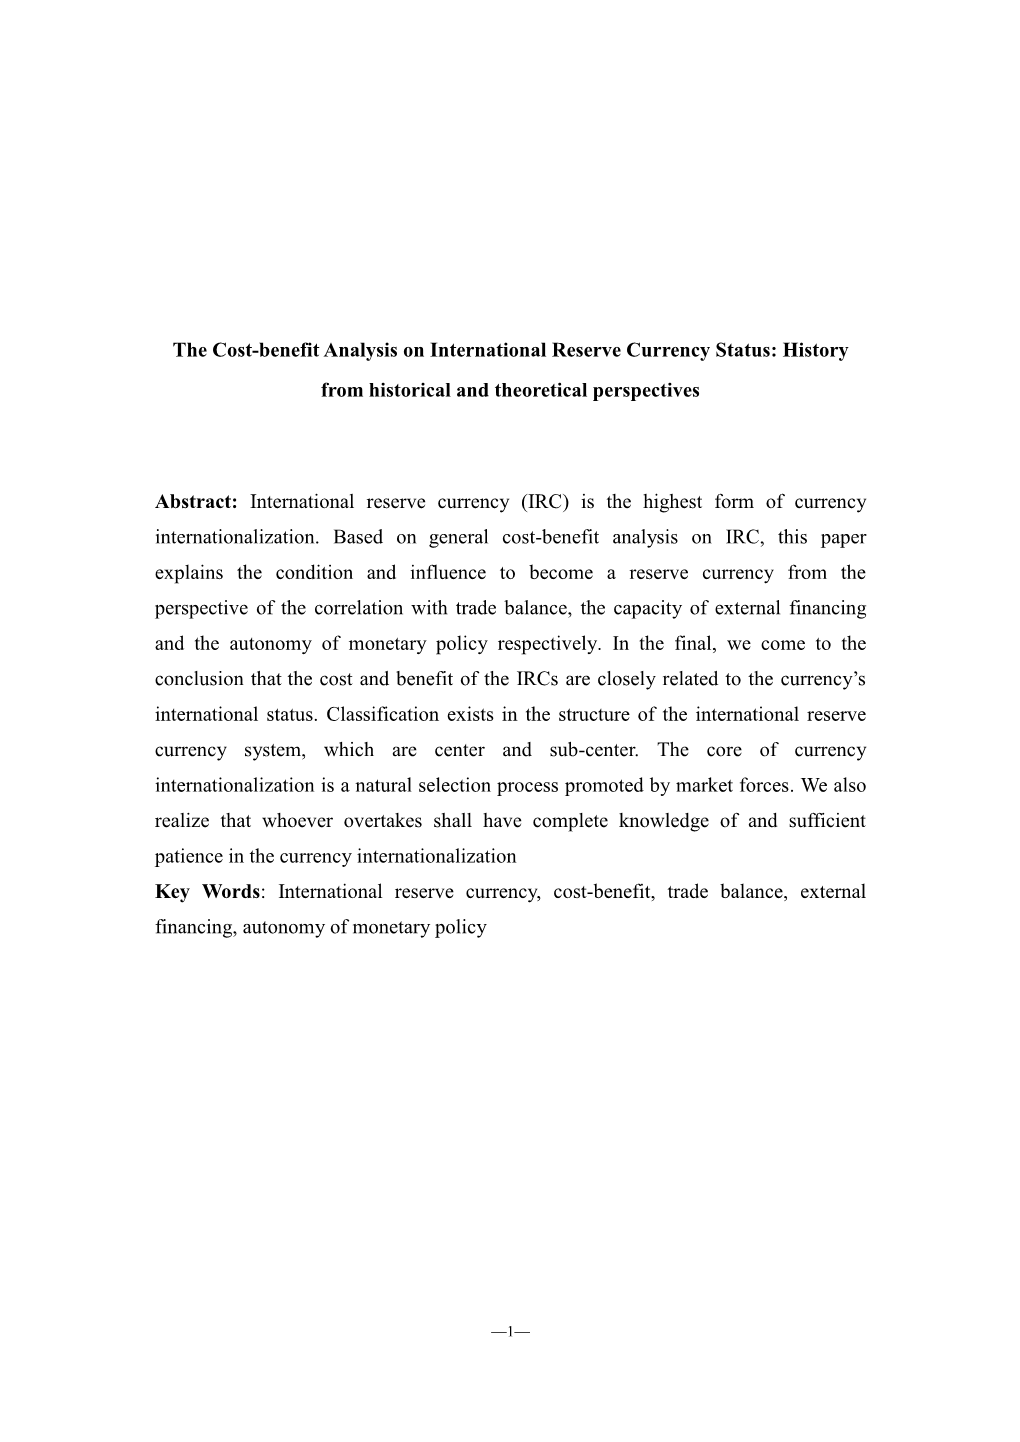 The Cost-Benefit Analysis on International Reserve Currency Status: History from Historical and Theoretical Perspectives